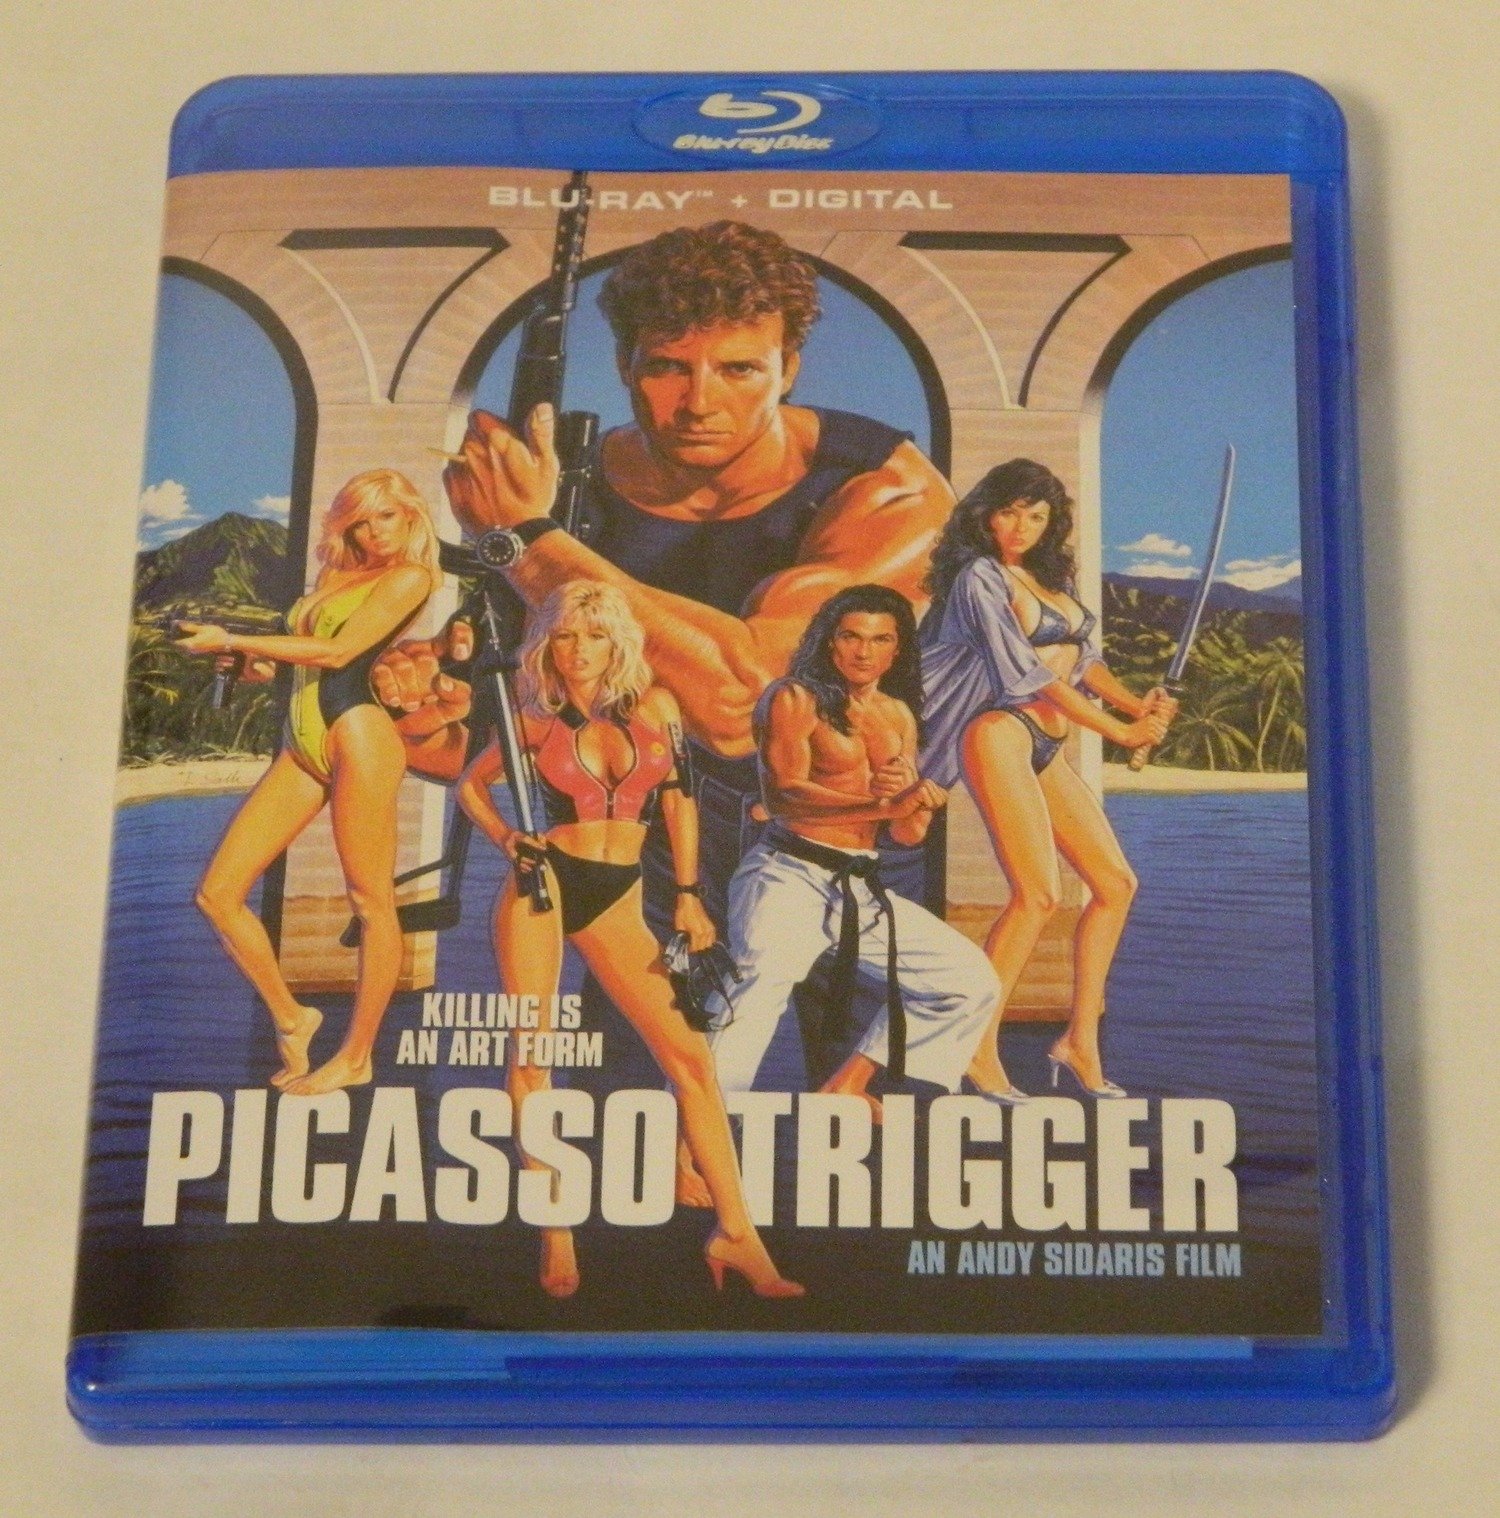 Picasso Trigger Blu-ray